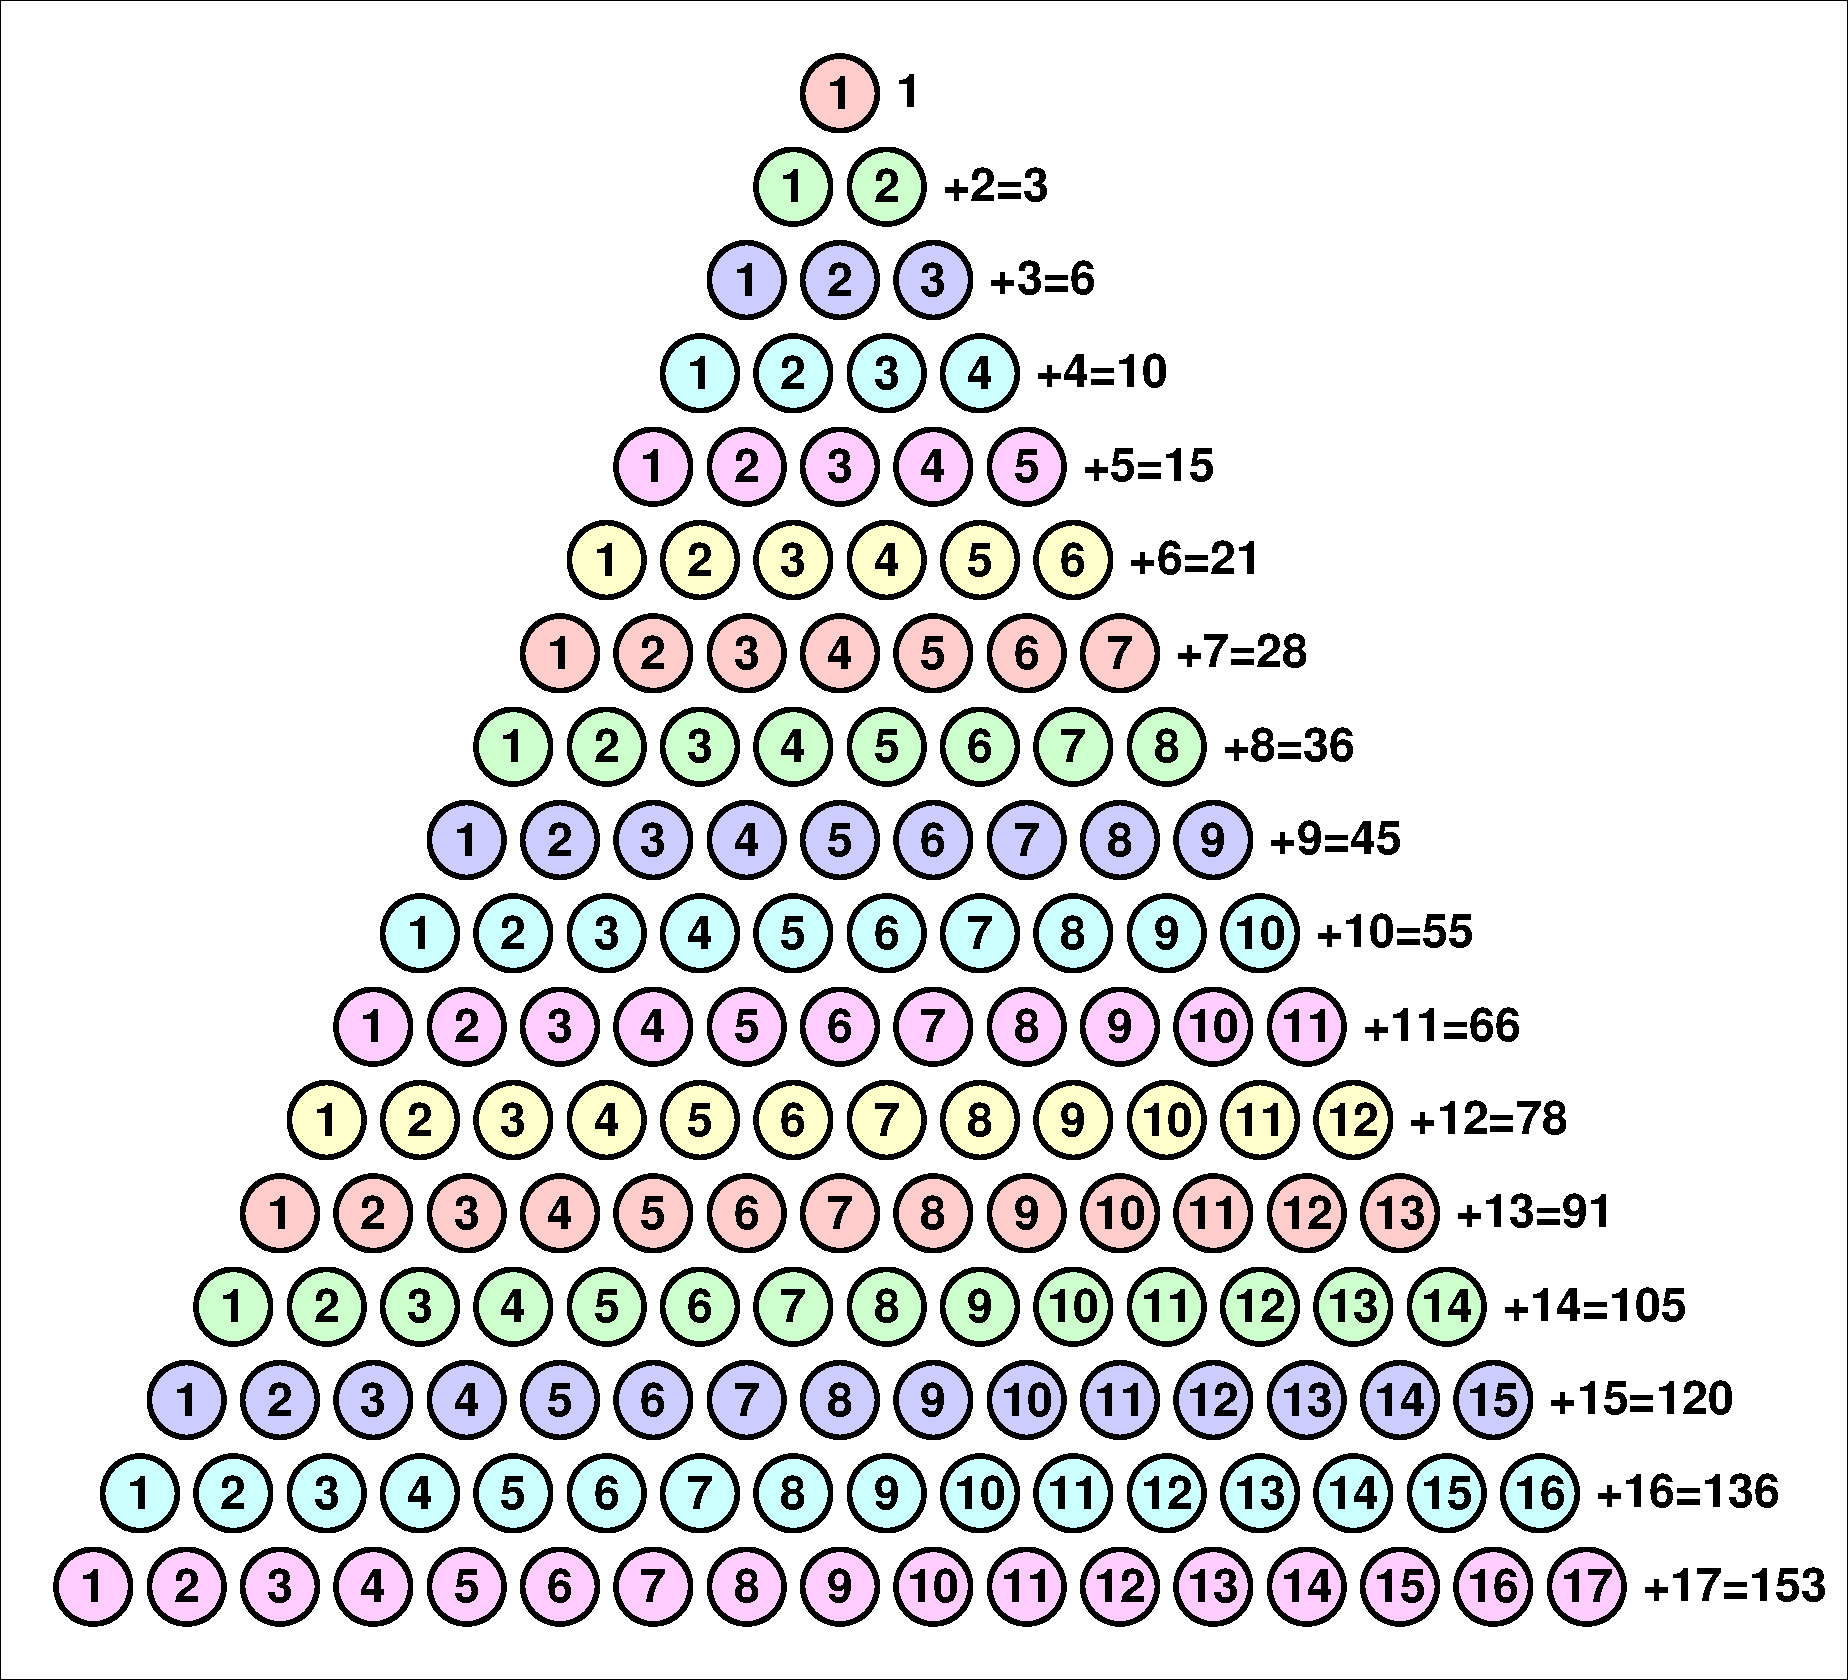 Number of the fish using dots